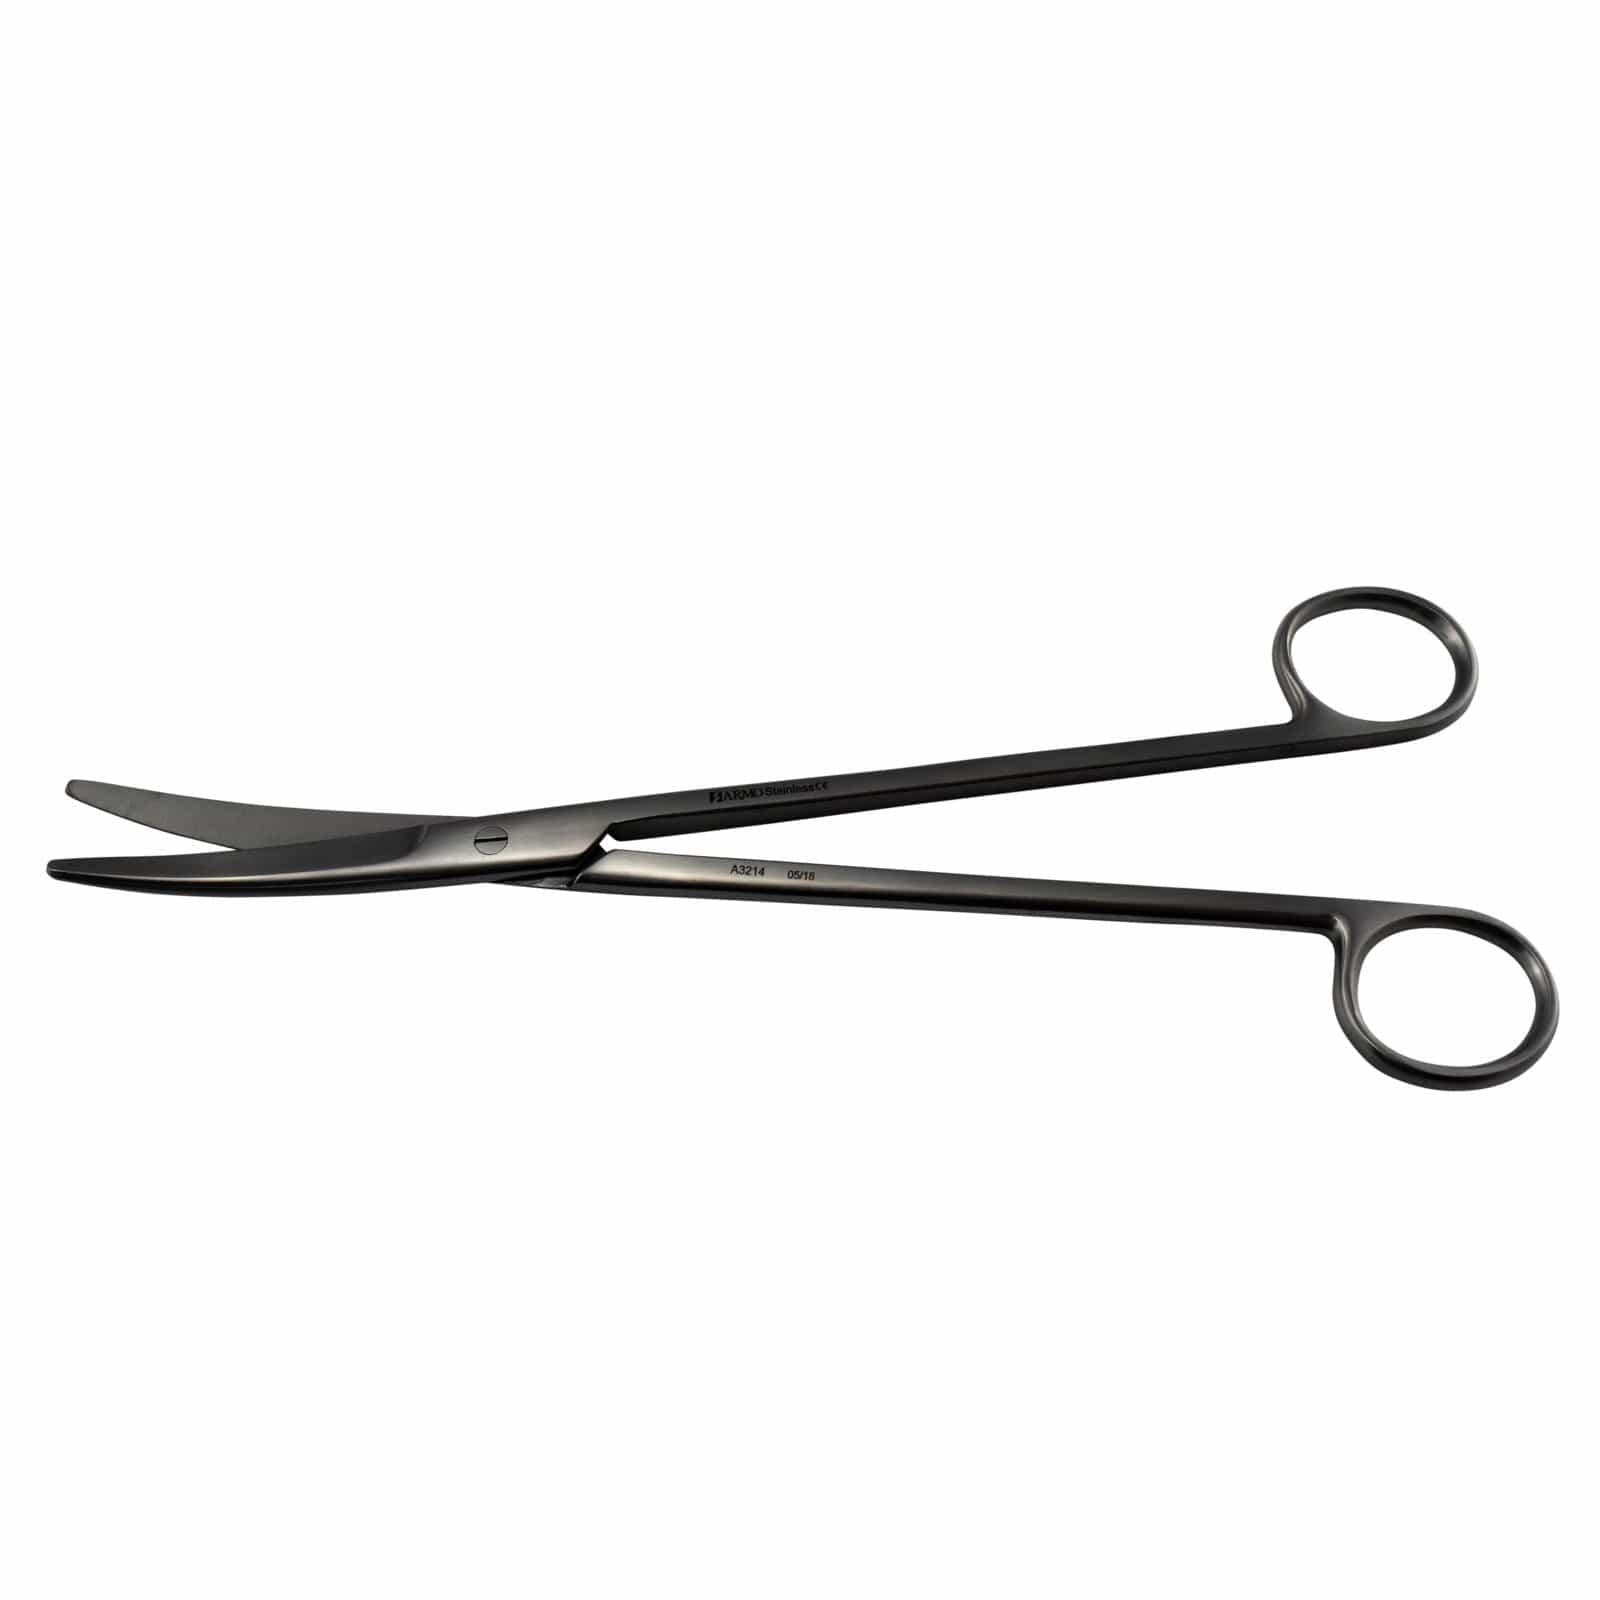 Armo Surgical Instruments 23cm / Curved / Standard Armo Mayo Scissors